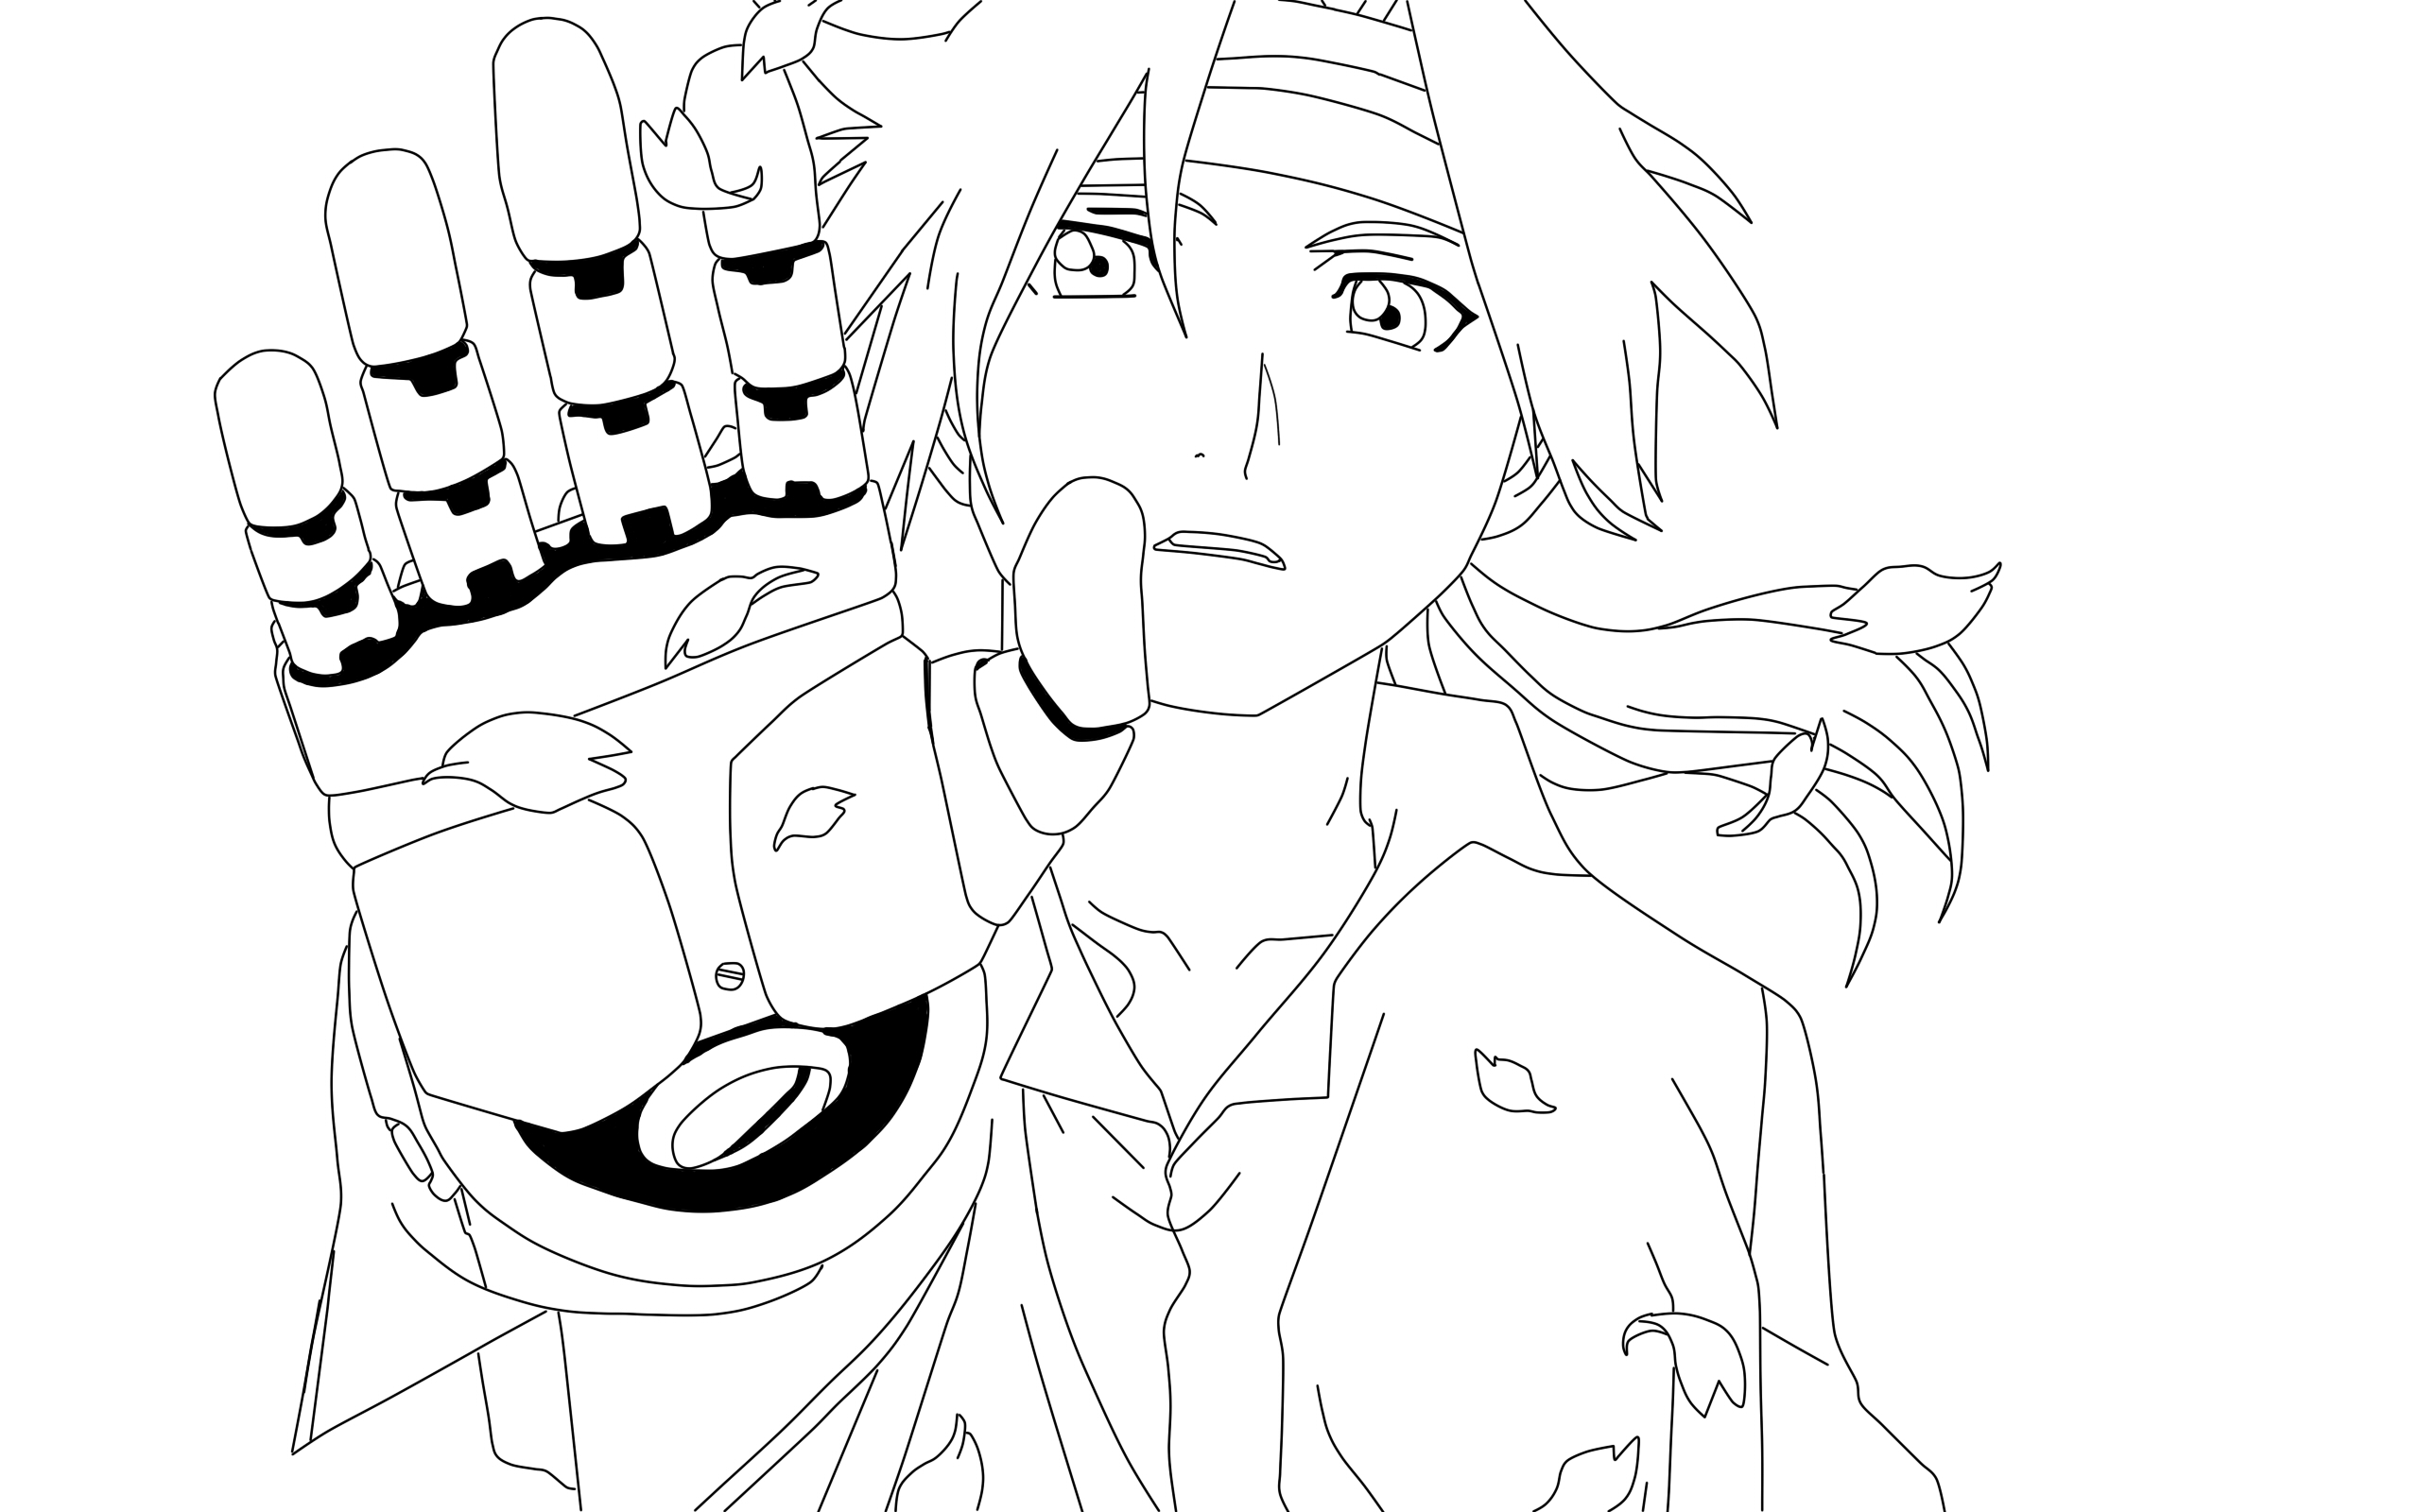 Download Lineart Edward Elric by Fresh-Anime on DeviantArt